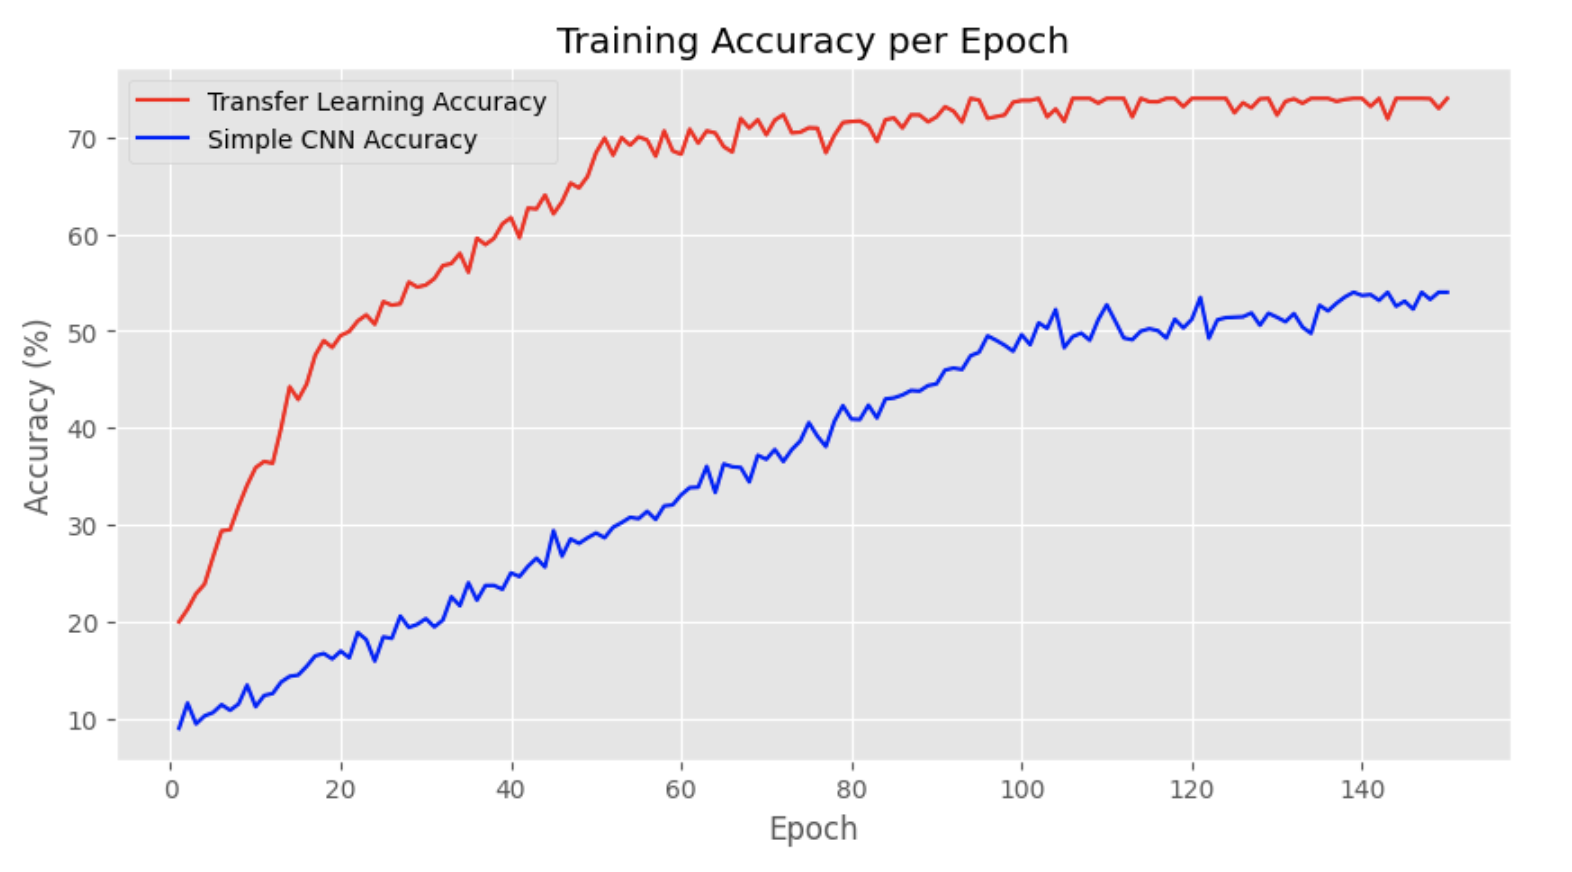 Training Accuracy for Transfer Learning